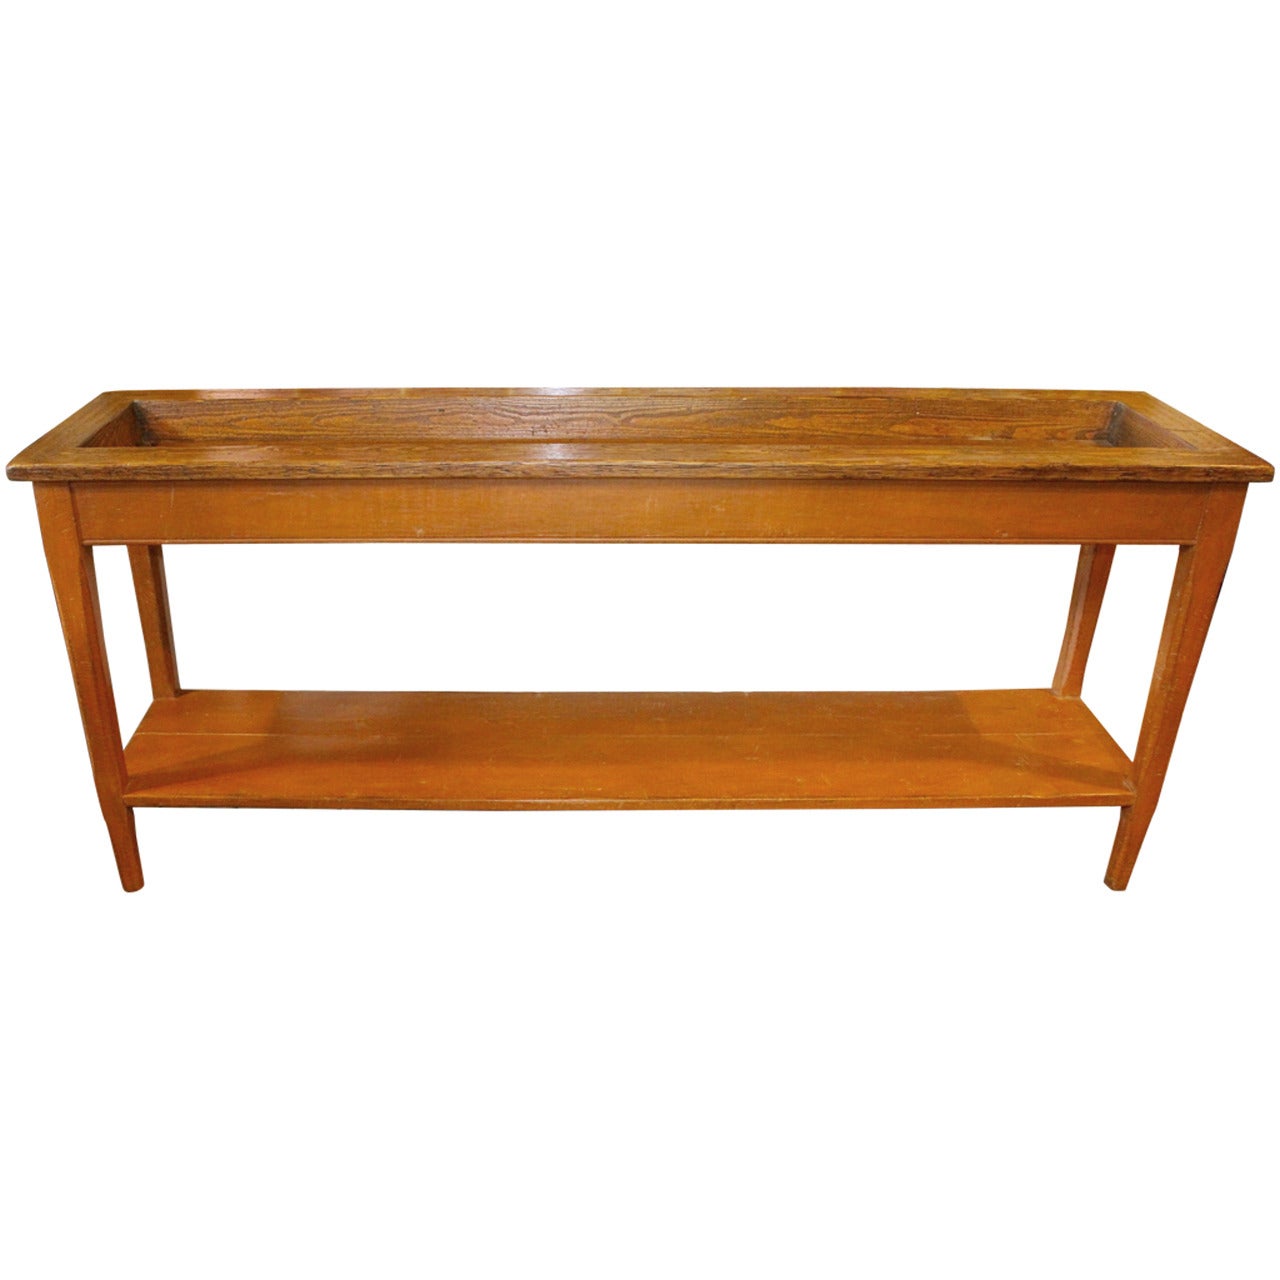 Sideboard Table From A Maple Sugar Shack